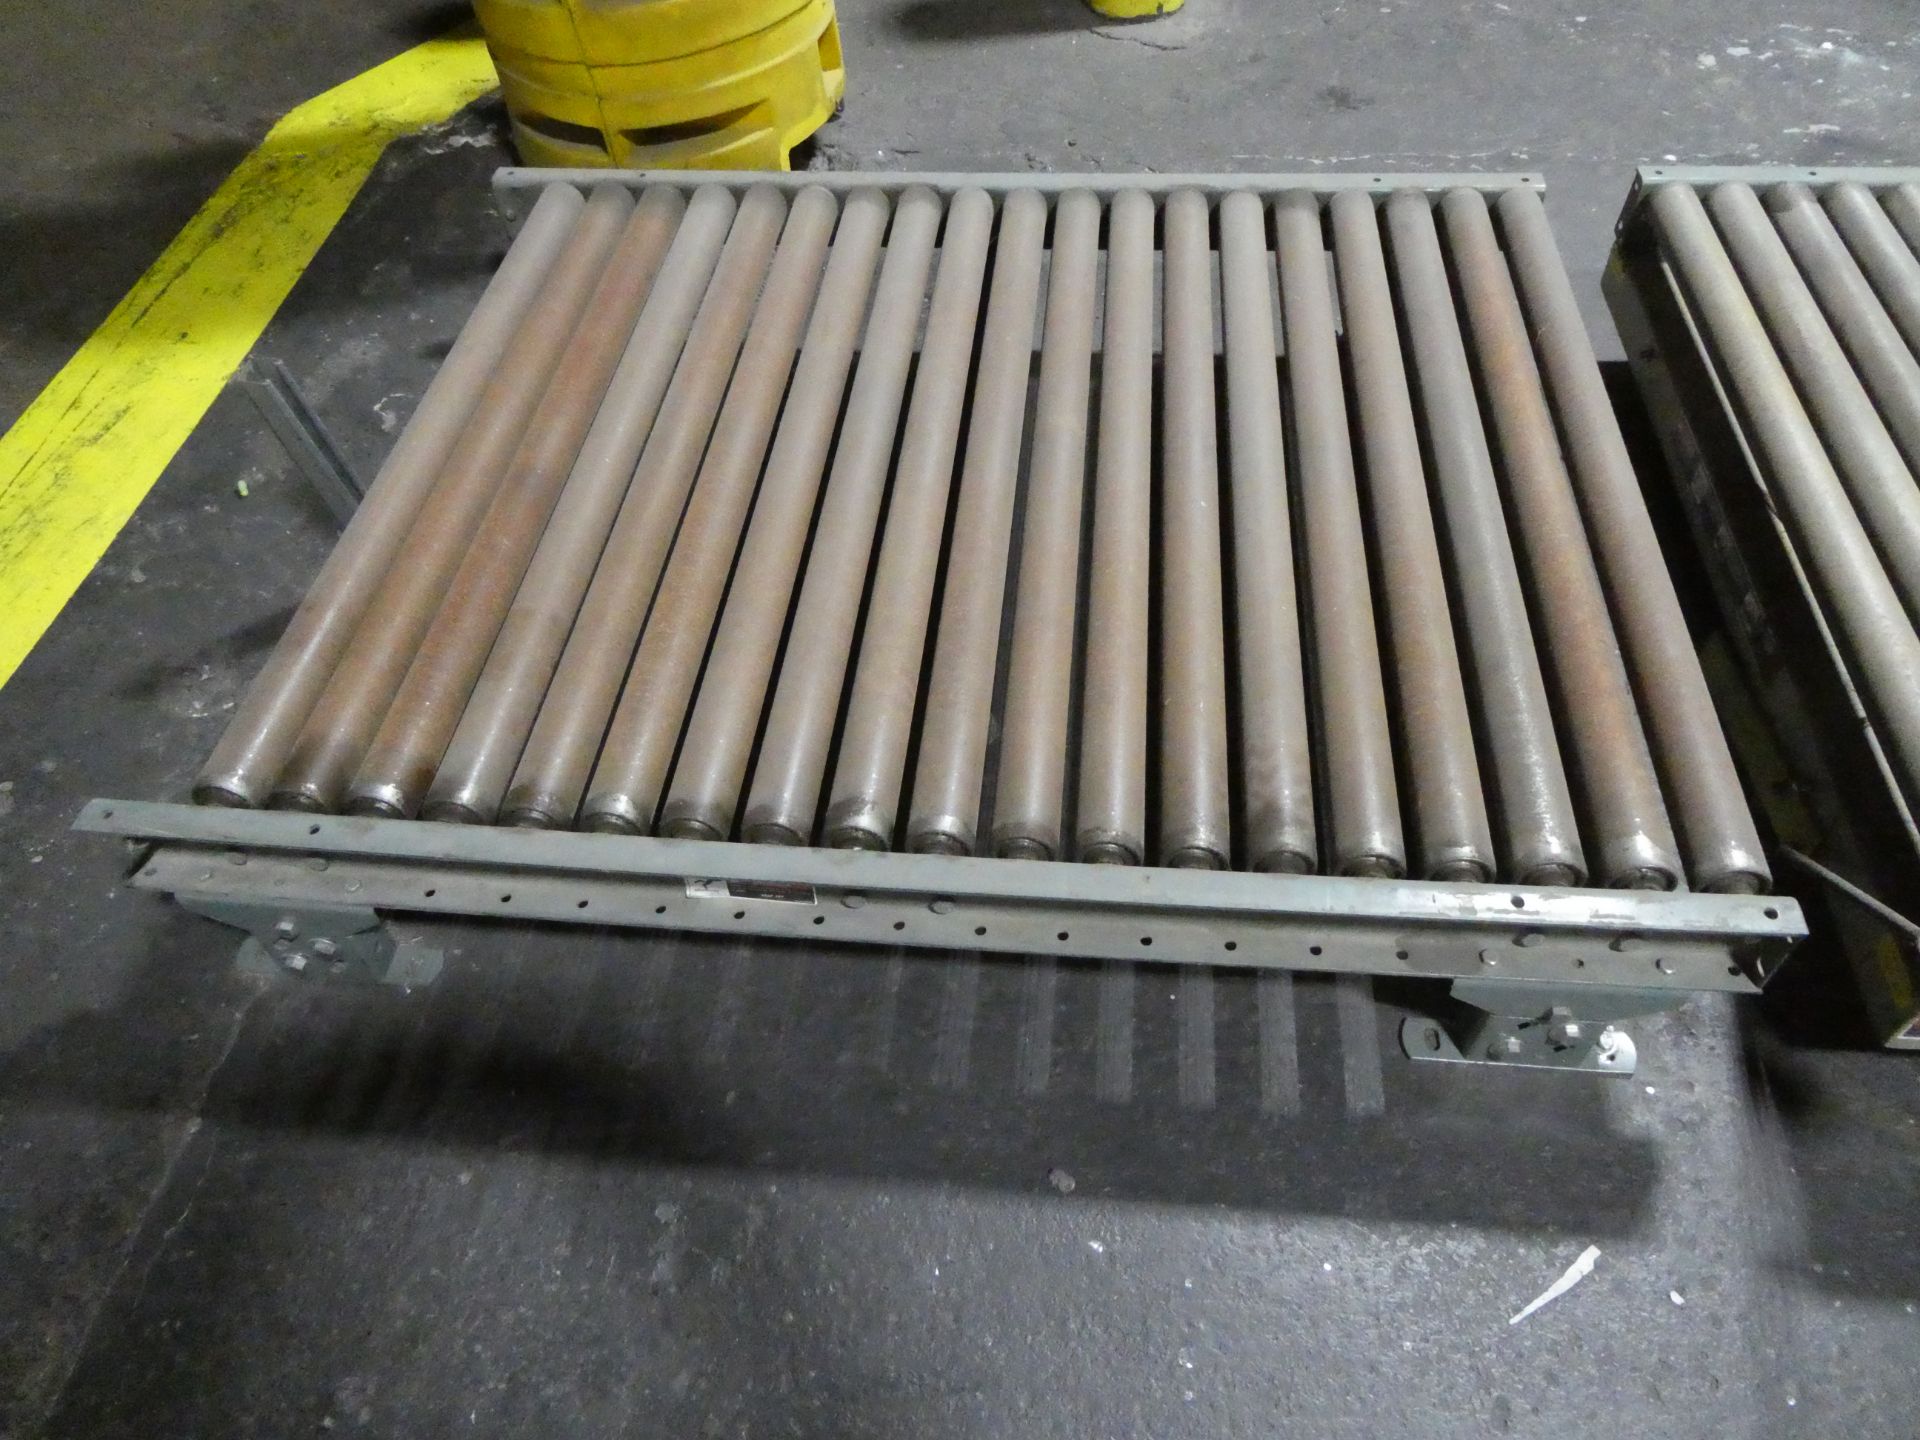 Southworth Lift Table w/ Outfeed conveyor - Image 3 of 4